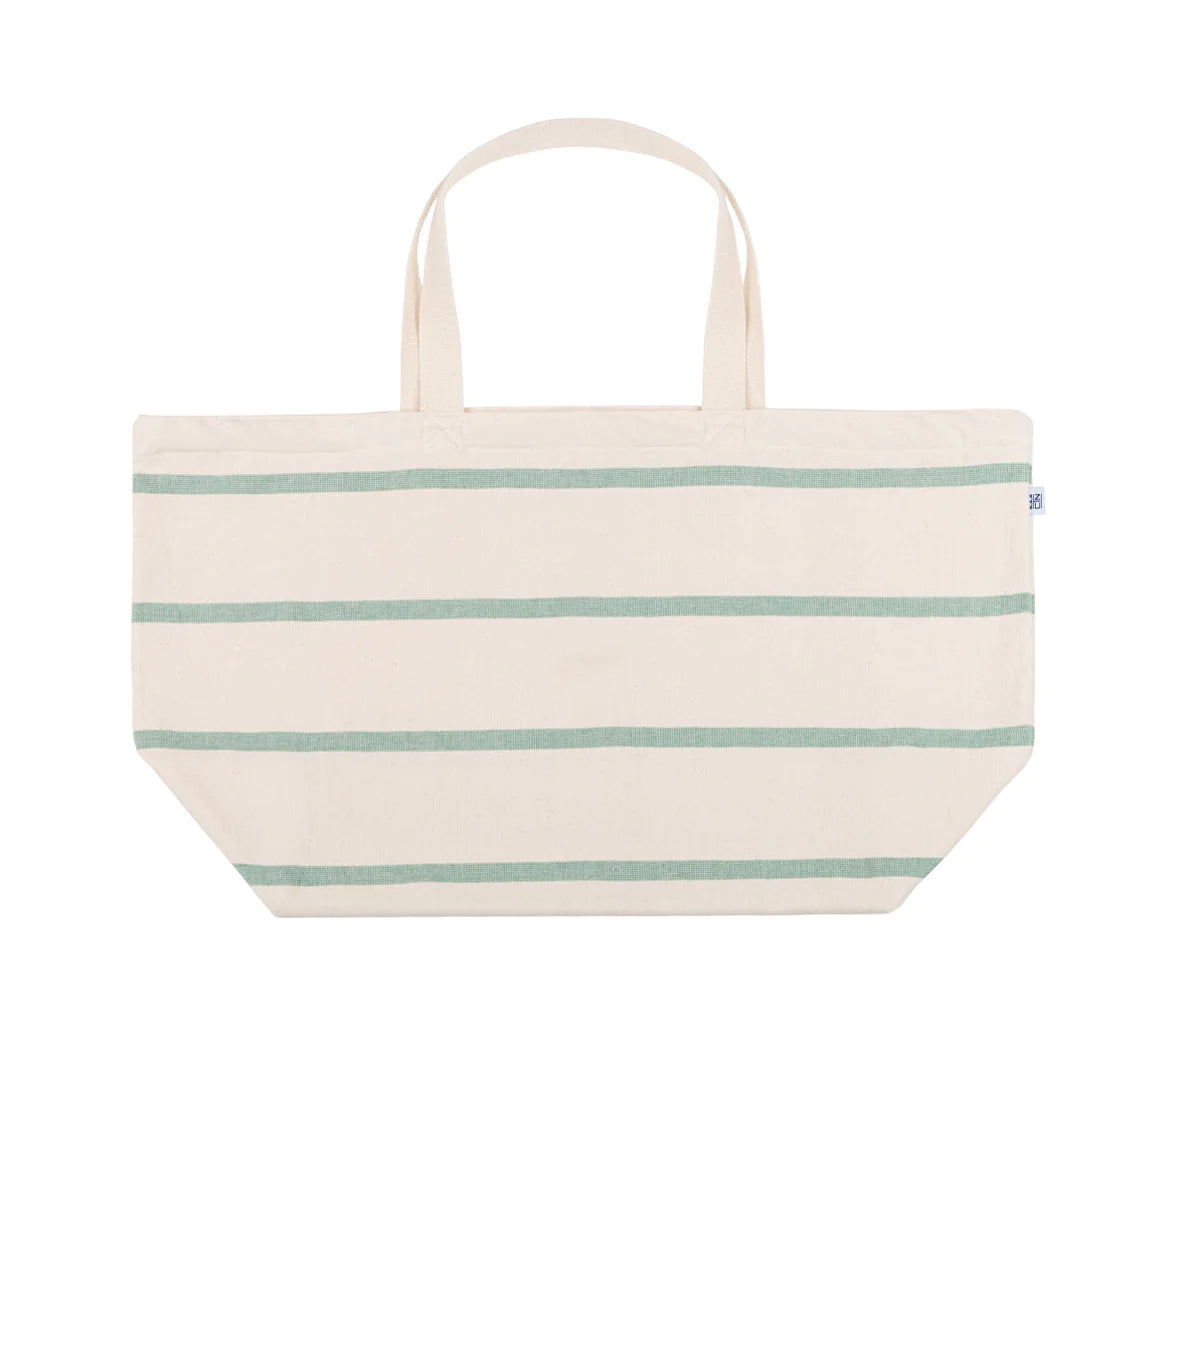 terry towel ivory and green stripe beach bag on white background